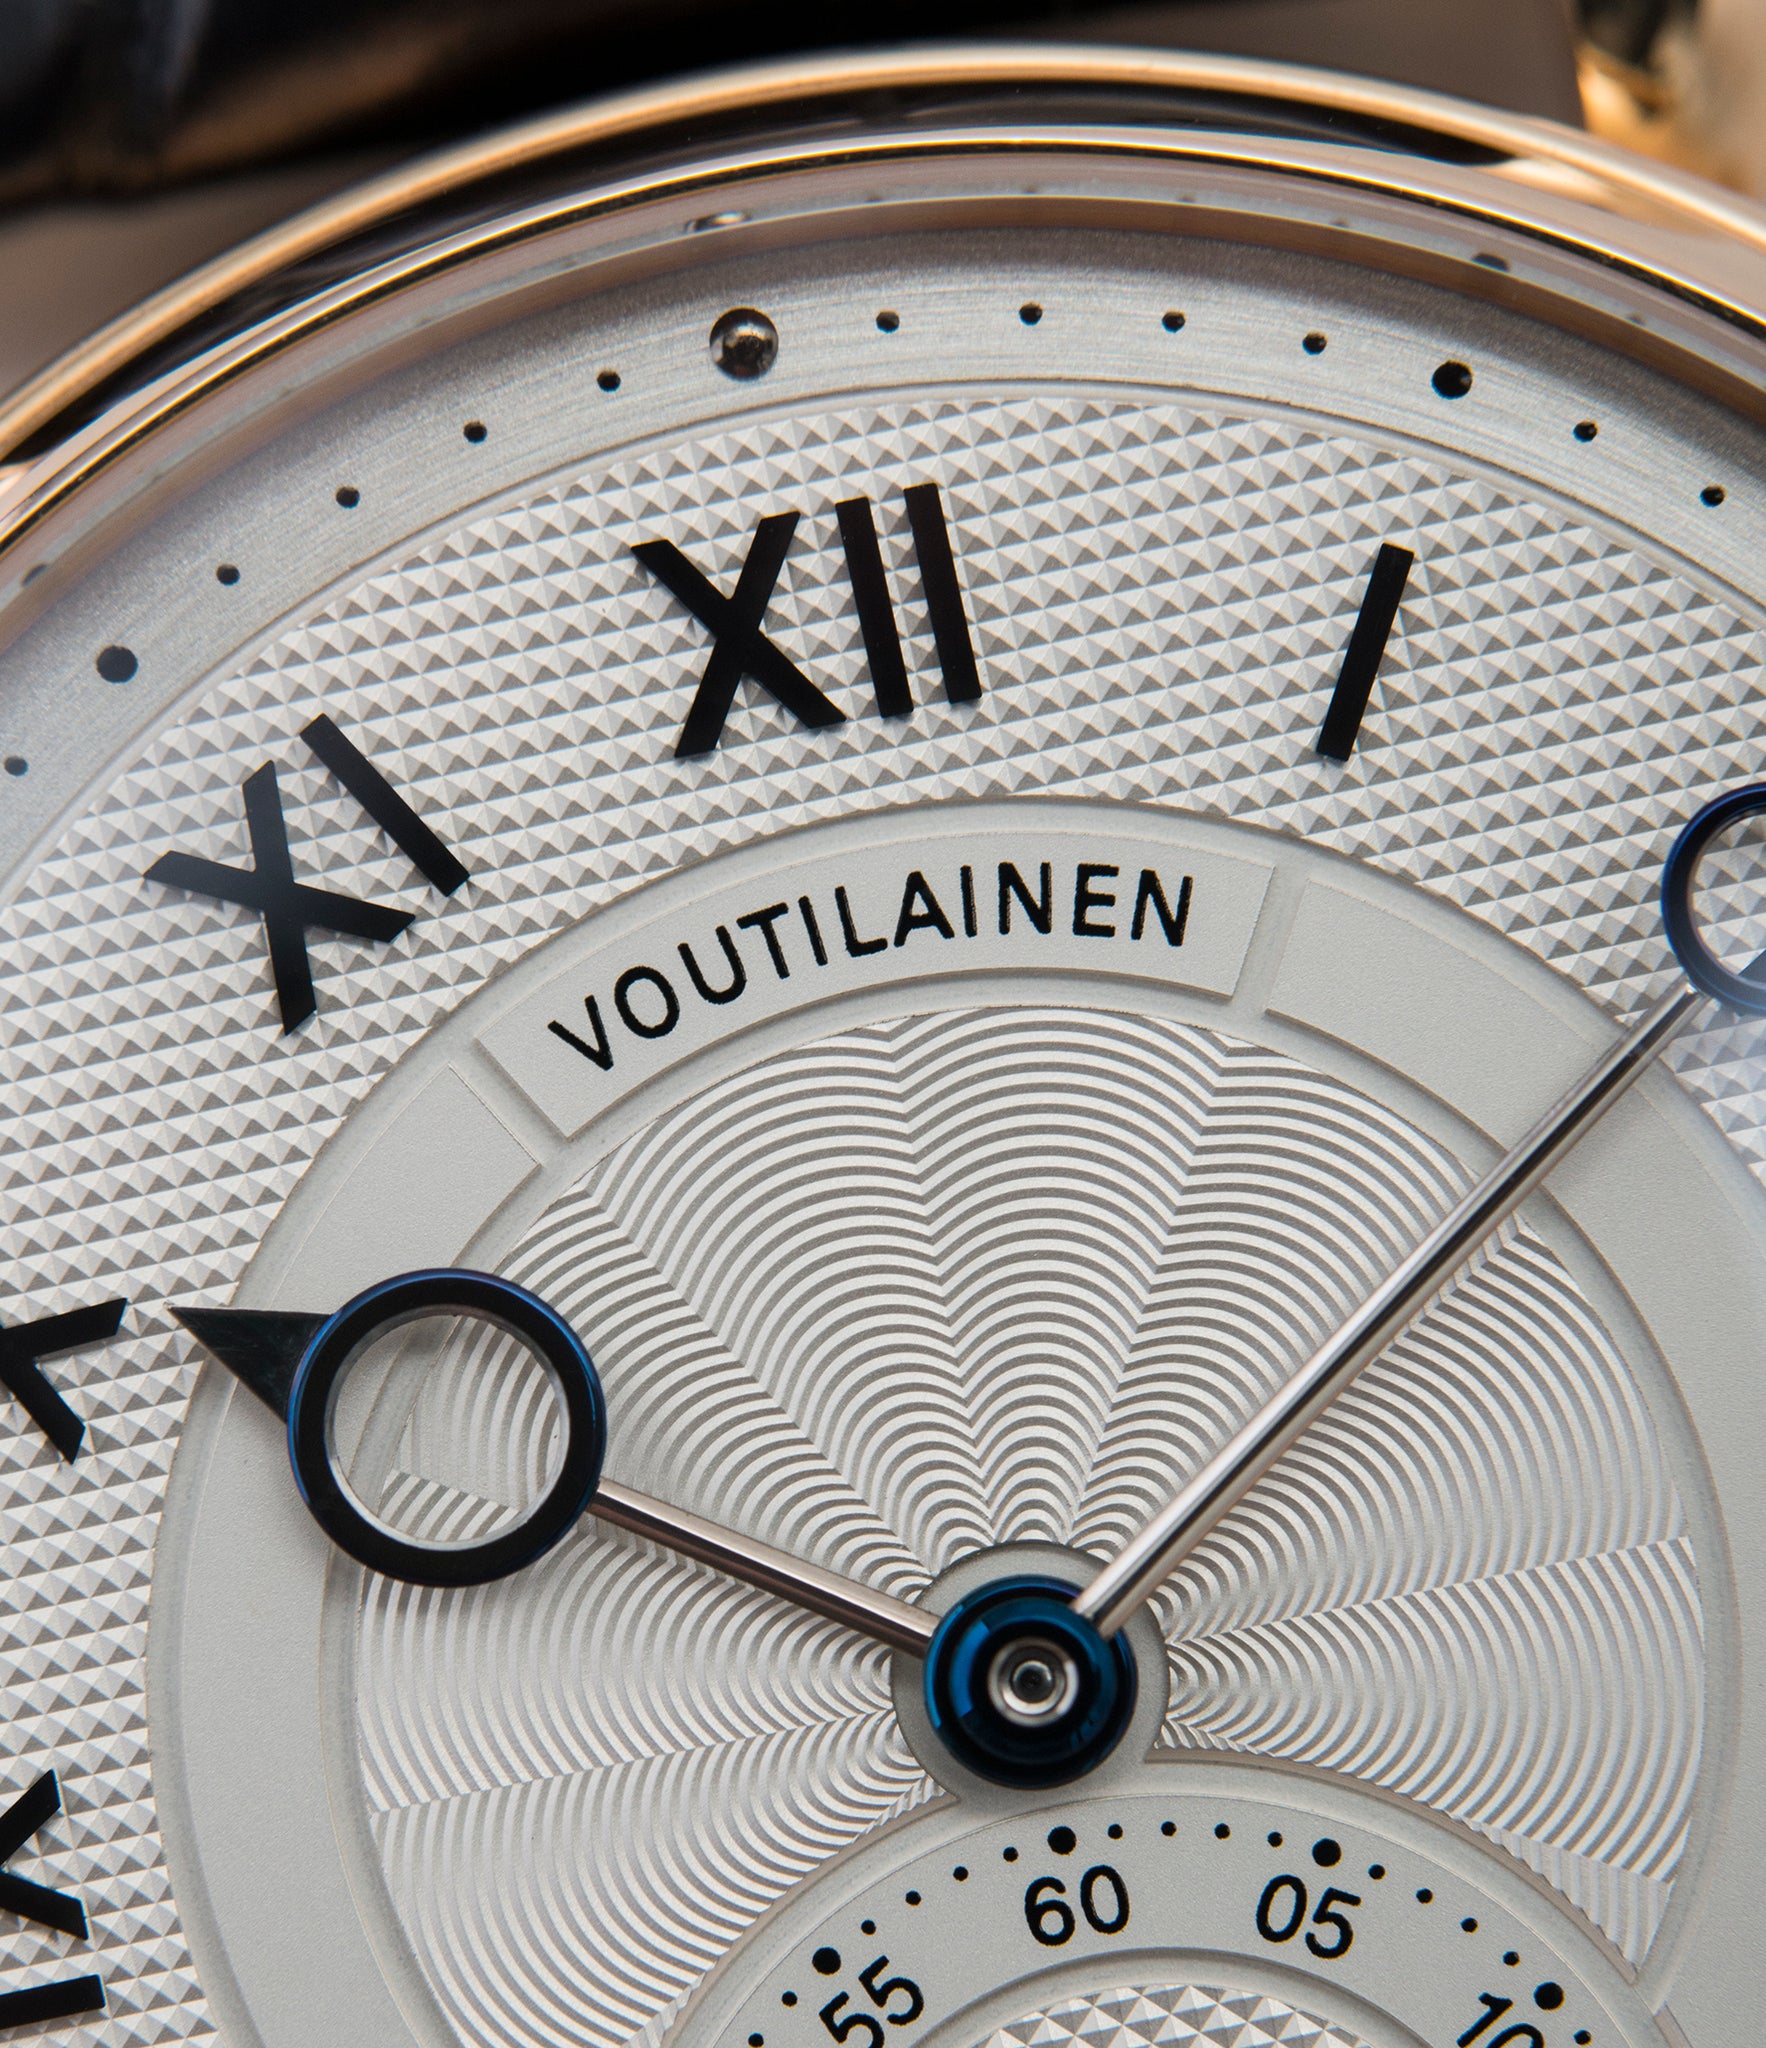 guilloche engine-turned Voutilainen Observatoire Limited Edition rose gold rare dress watch for sale online at A Collected Man London endorsed seller of independent watchmaker